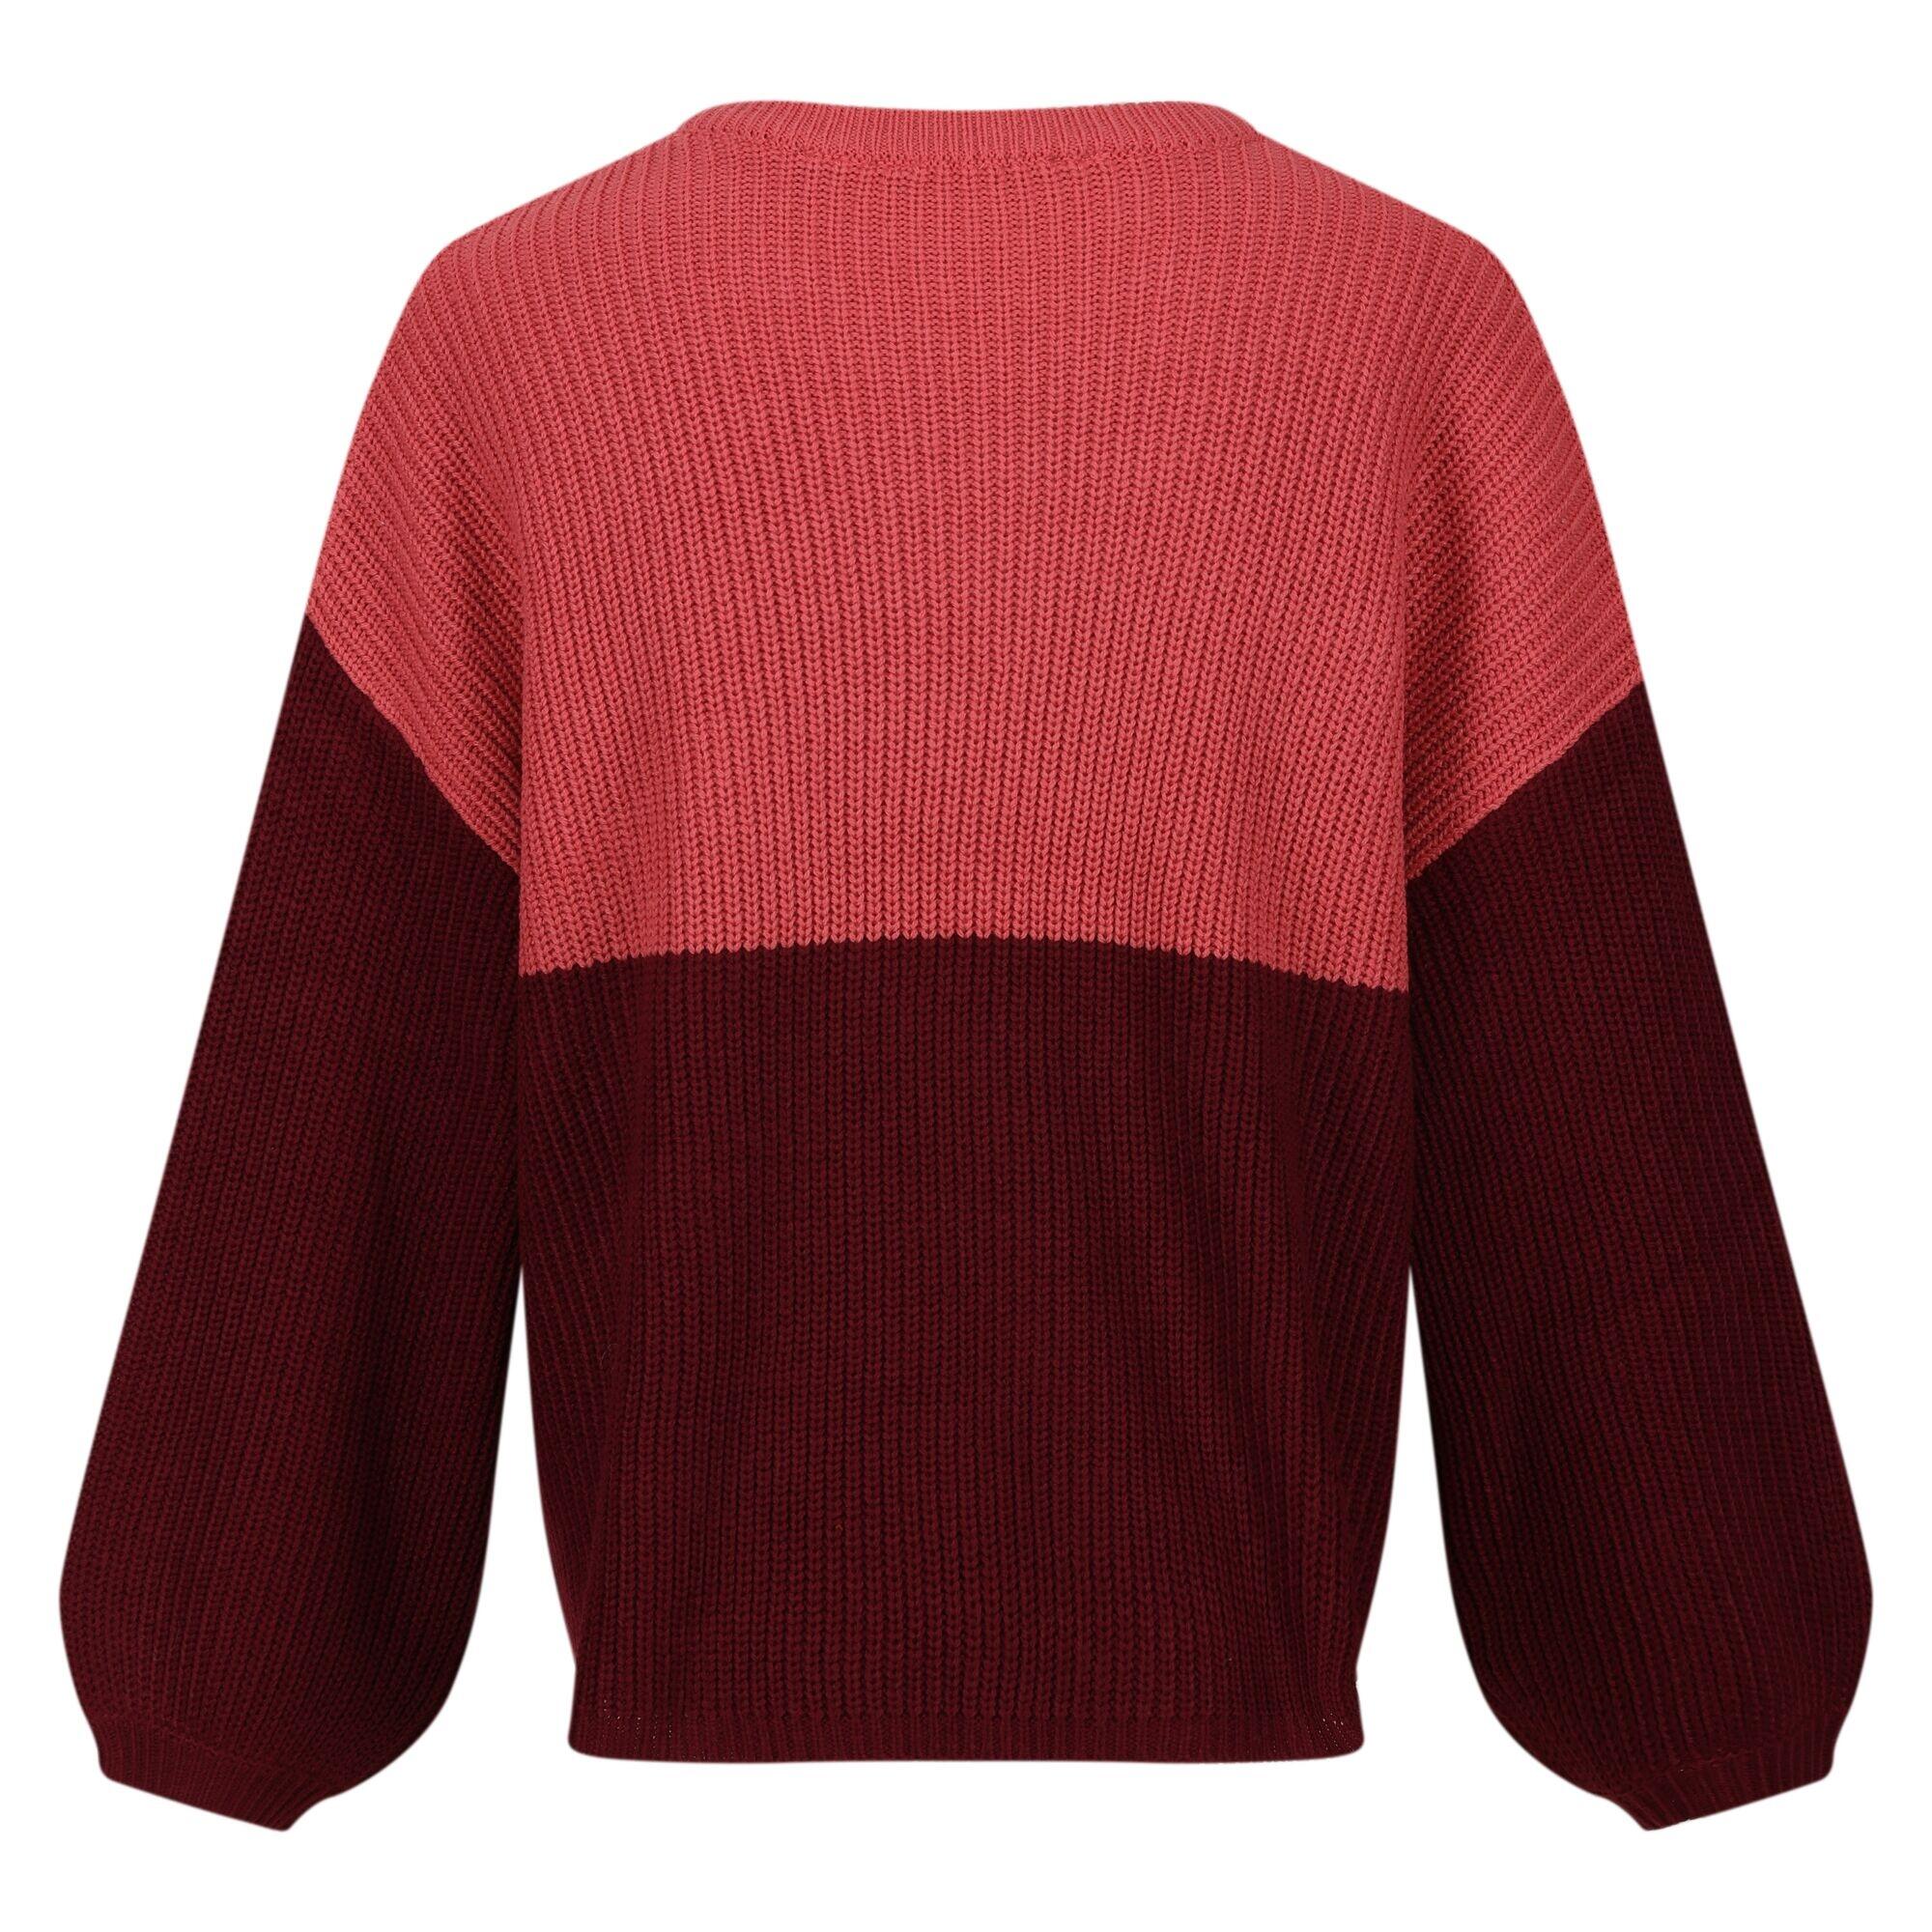 Womens/Ladies Kamaria Knitted Jumper (Mineral Red/Cabernet) 2/5